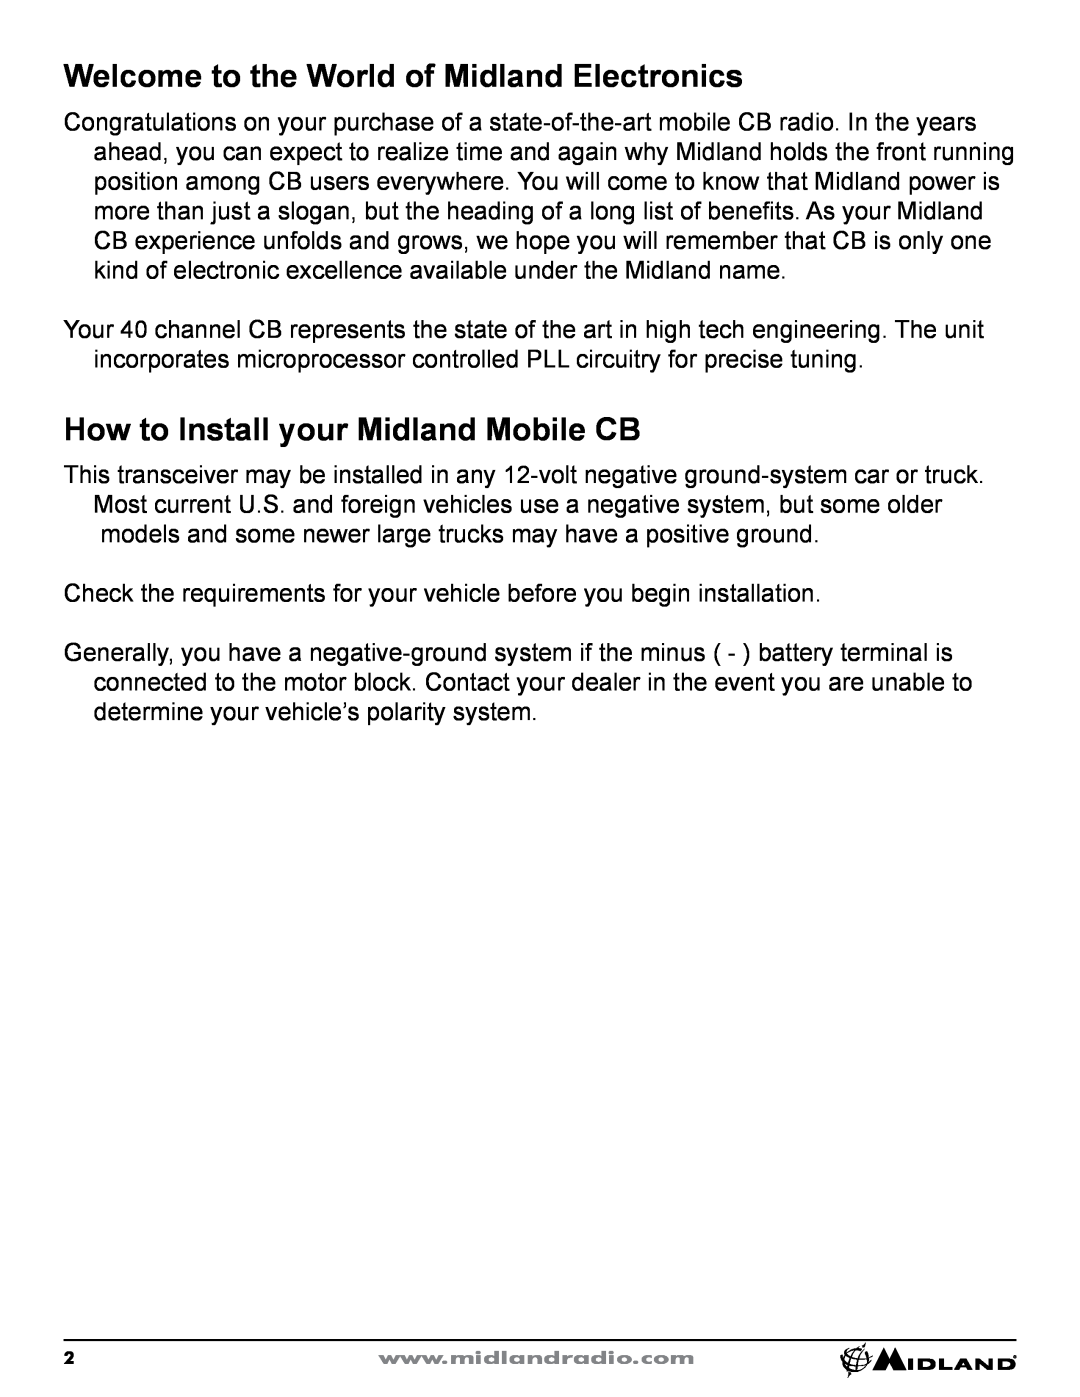 Midland Radio CB-1 owner manual Welcome to the World of Midland Electronics, How to Install your Midland Mobile CB 